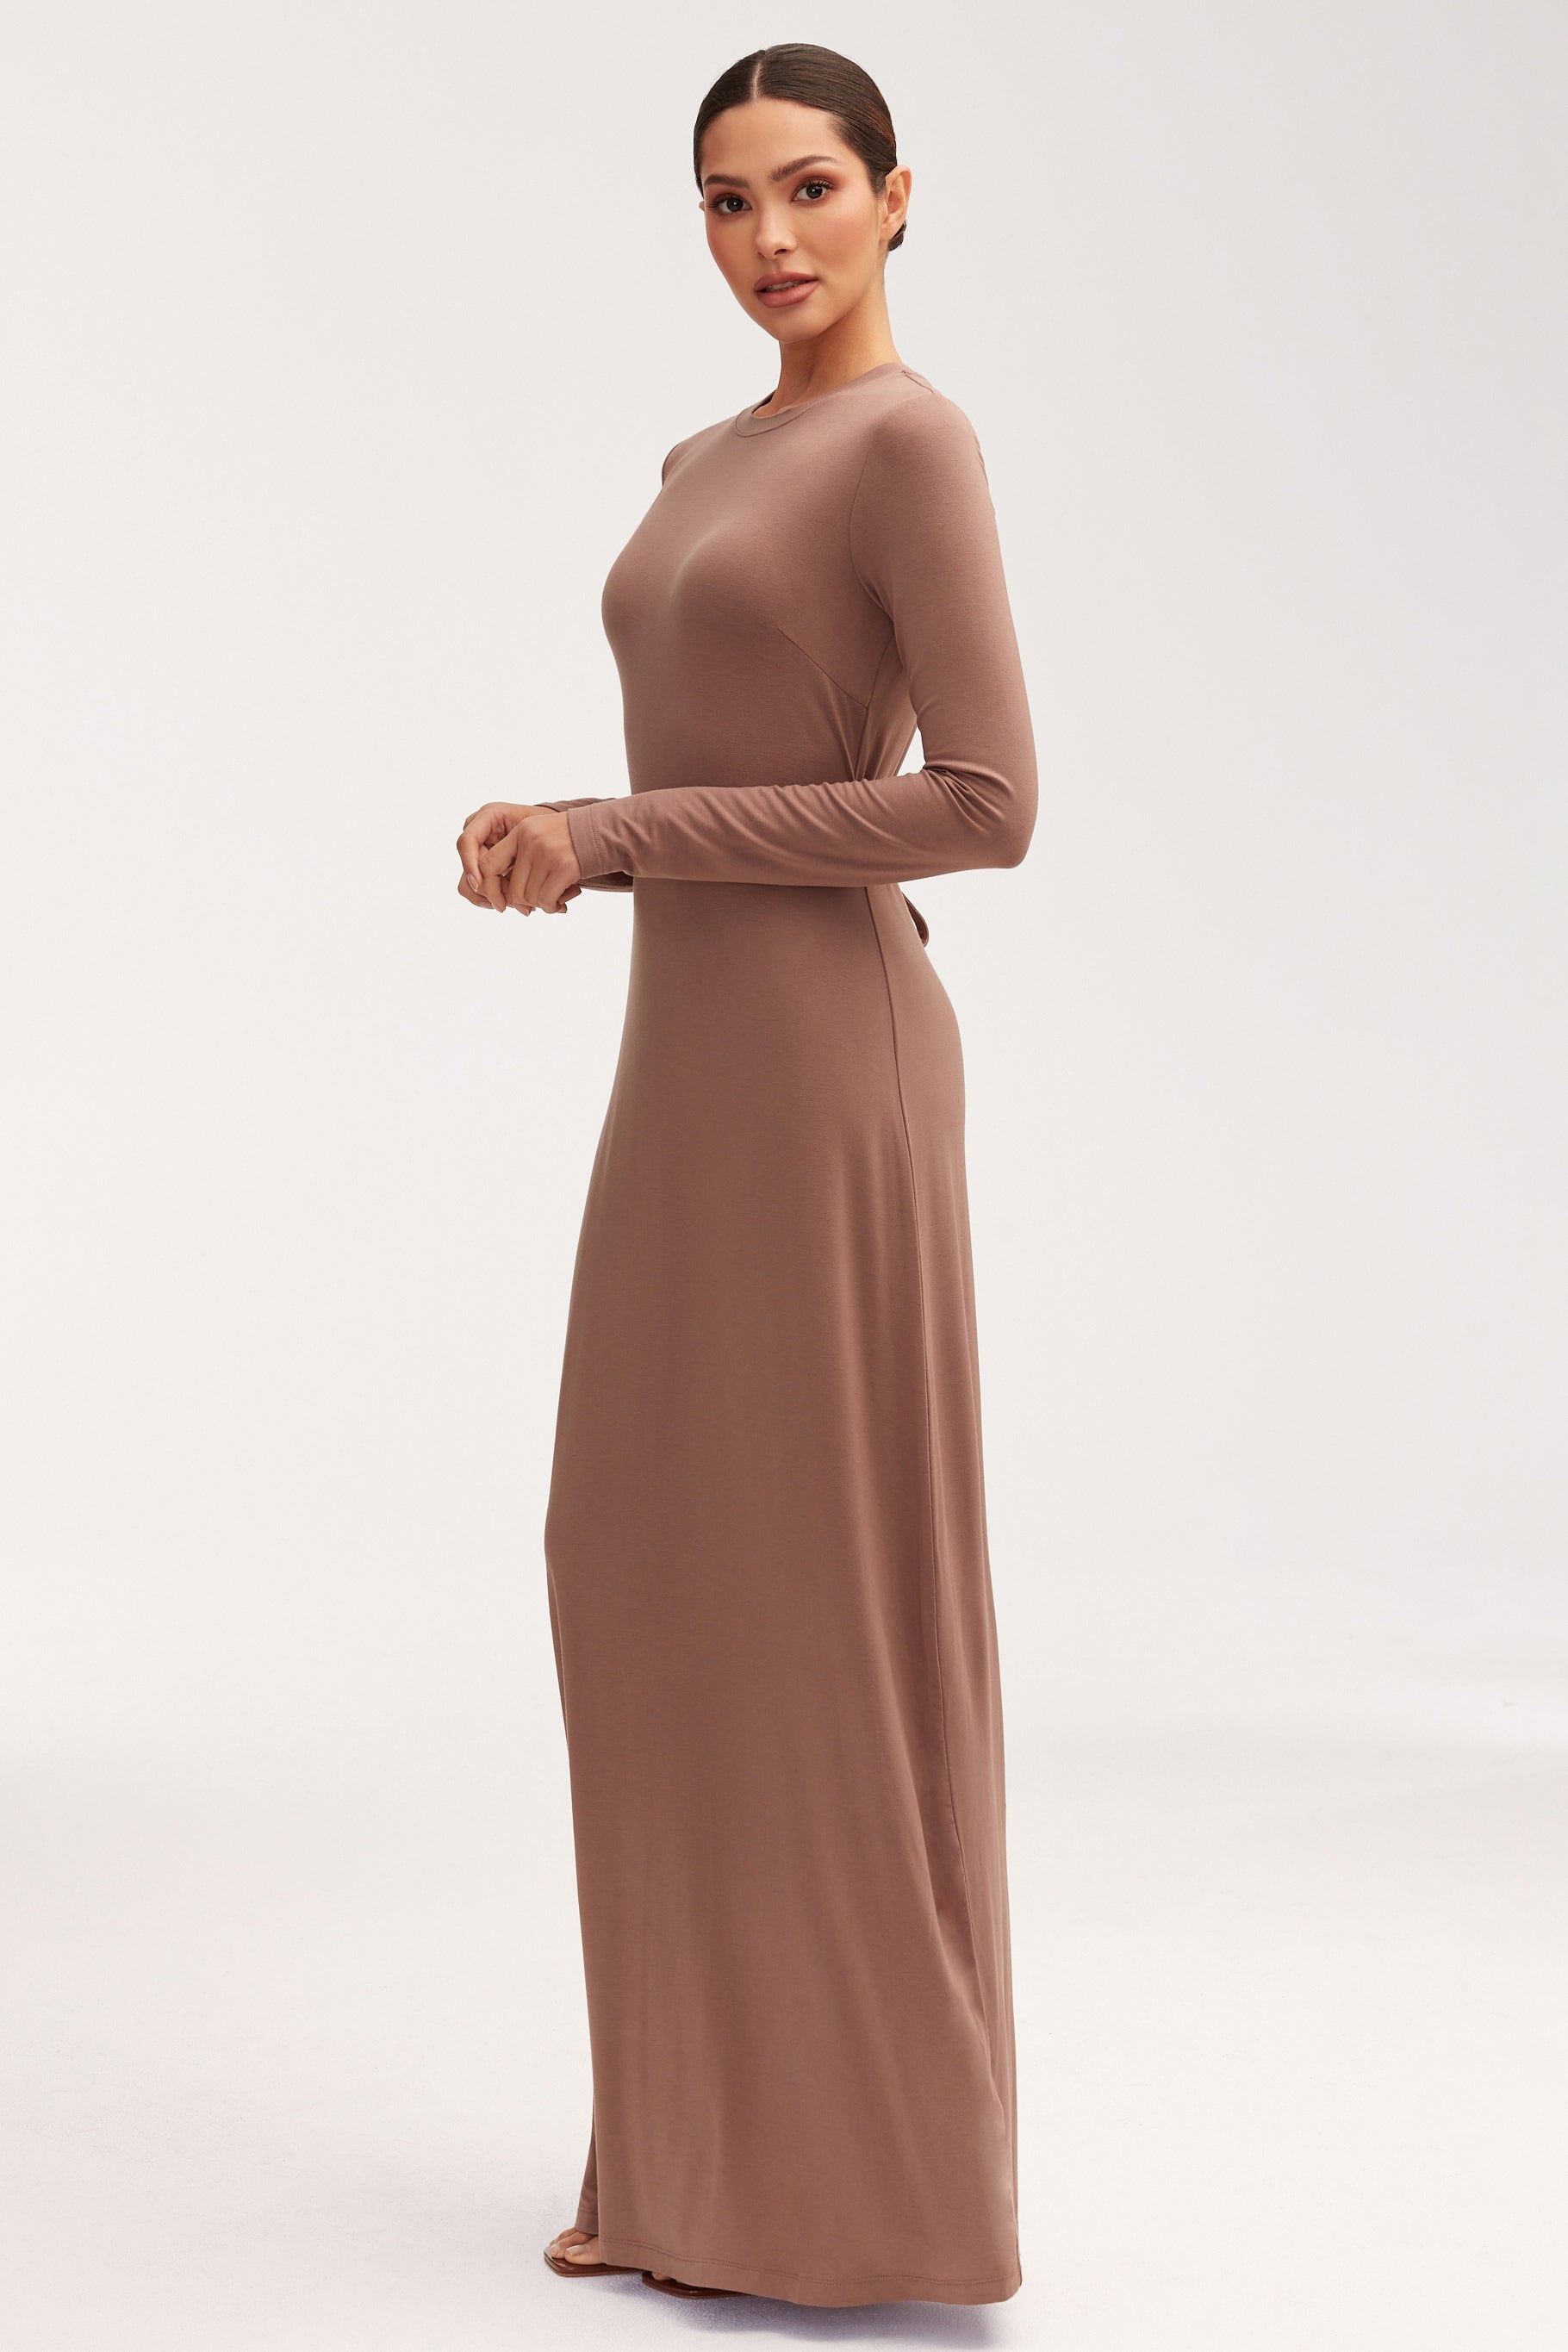 Essential Bamboo Jersey Maxi Dress - Deep Taupe Dresses epschoolboard 